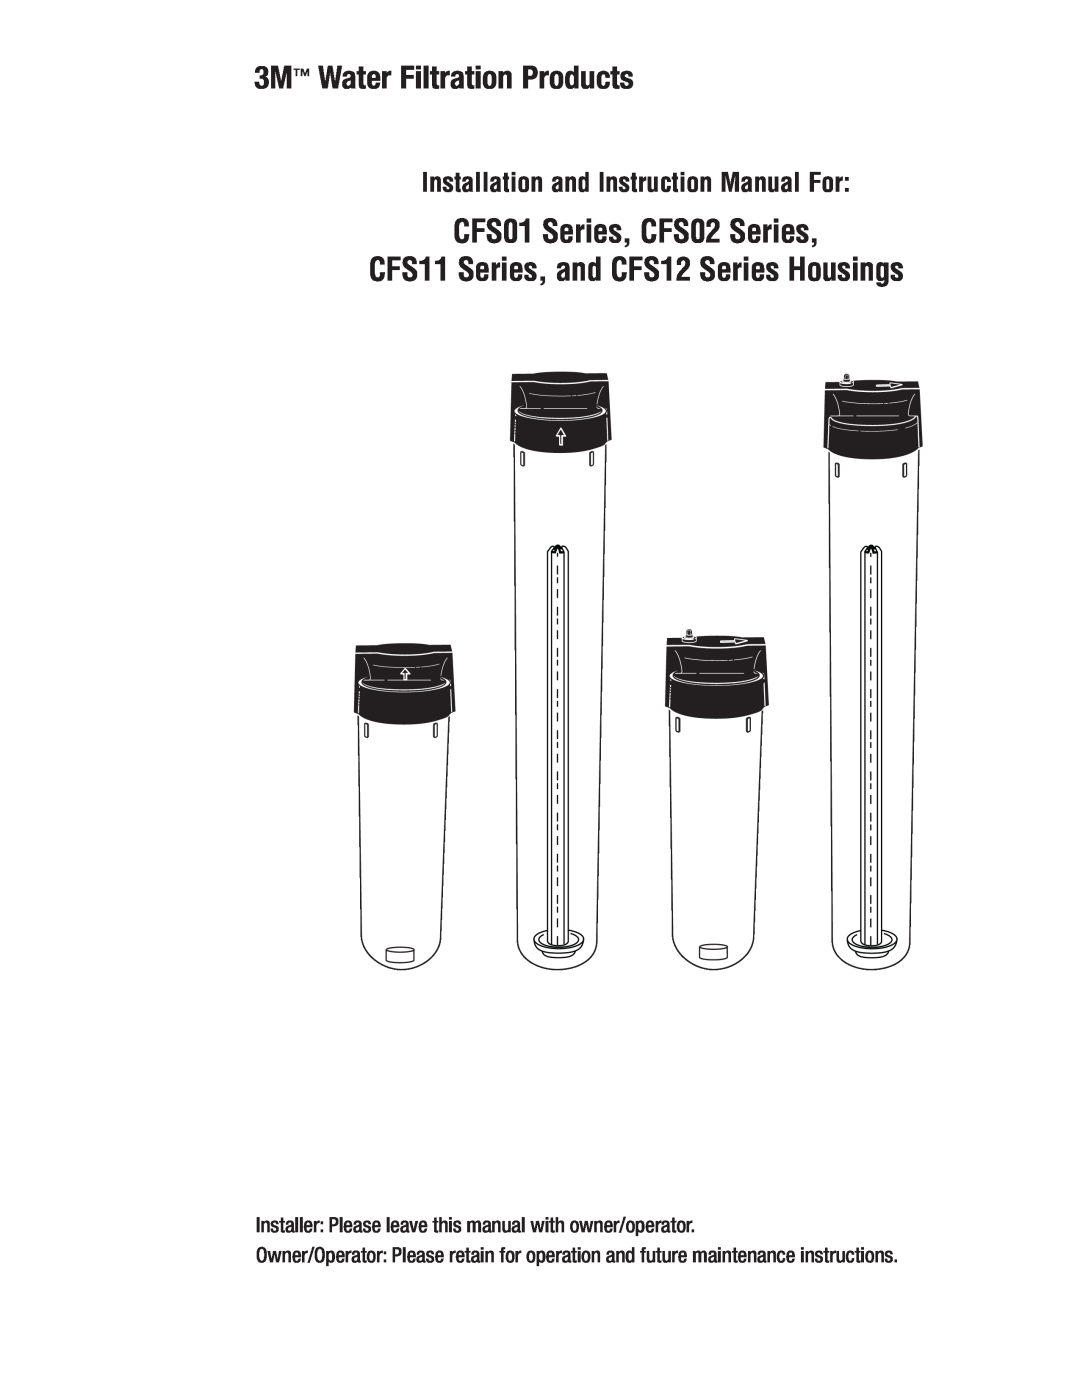 3M CFS11, CFS02 instruction manual 3M Water Filtration Products, Installer Please leave this manual with owner/operator 